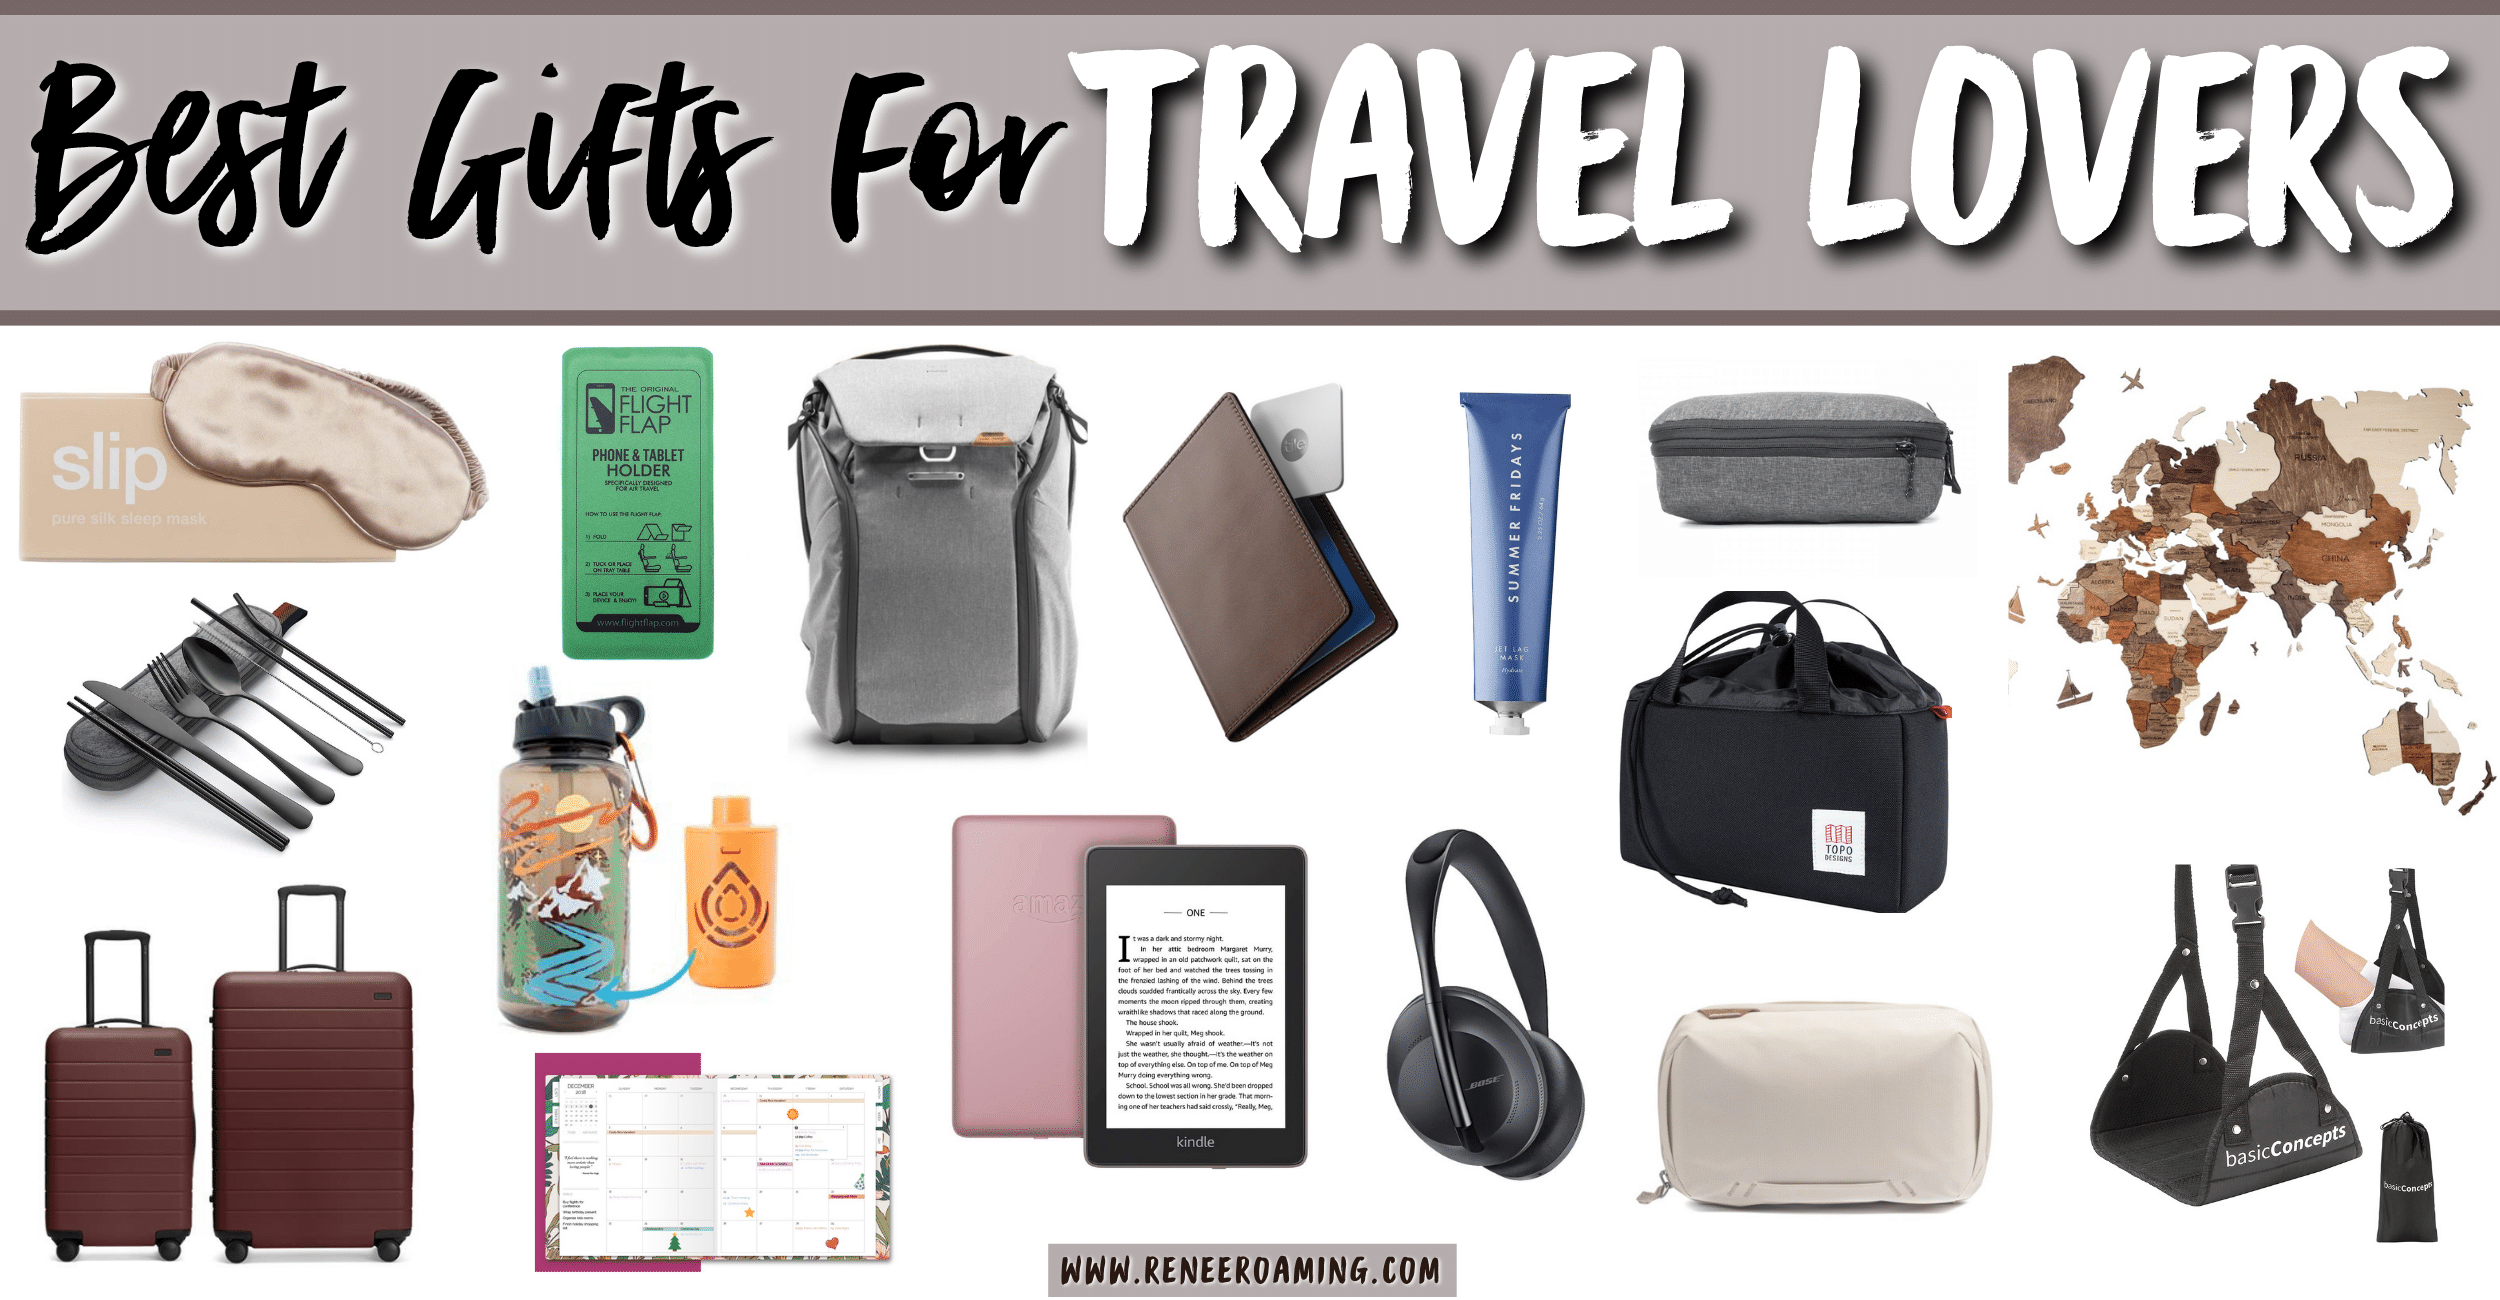 SUPER Thoughtful Gifts for Travel Lovers – Things they would actually use!  - My Perfect Itinerary